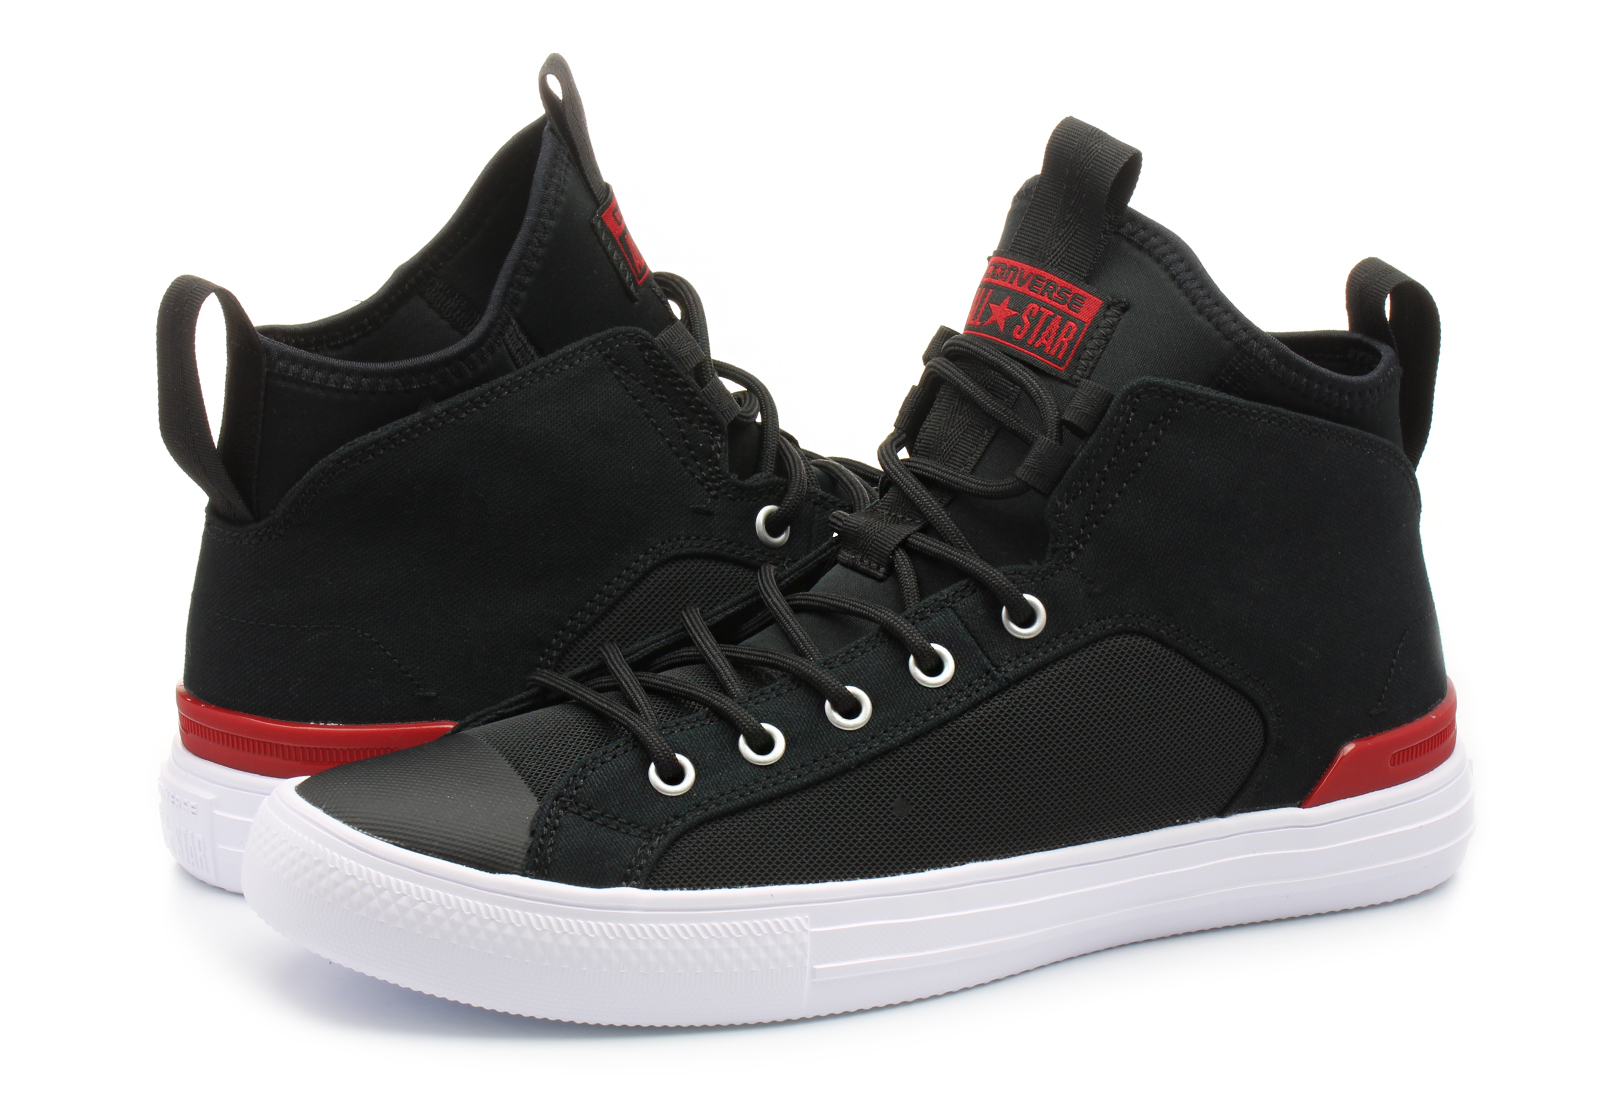 Converse High trainers - Chuck All Star Ultra Mid 159630C - Online shop for sneakers, shoes and boots